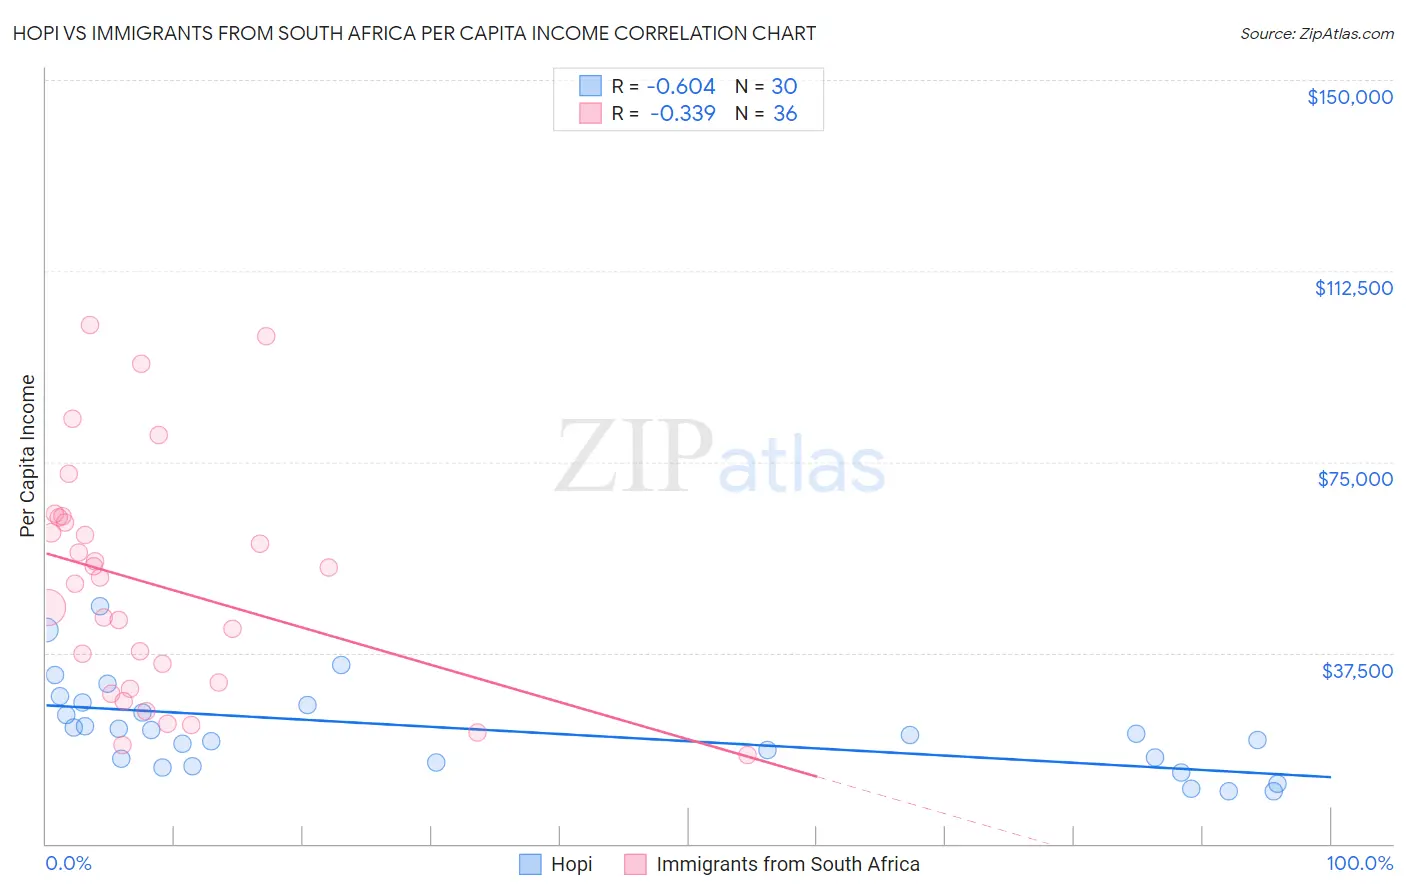 Hopi vs Immigrants from South Africa Per Capita Income